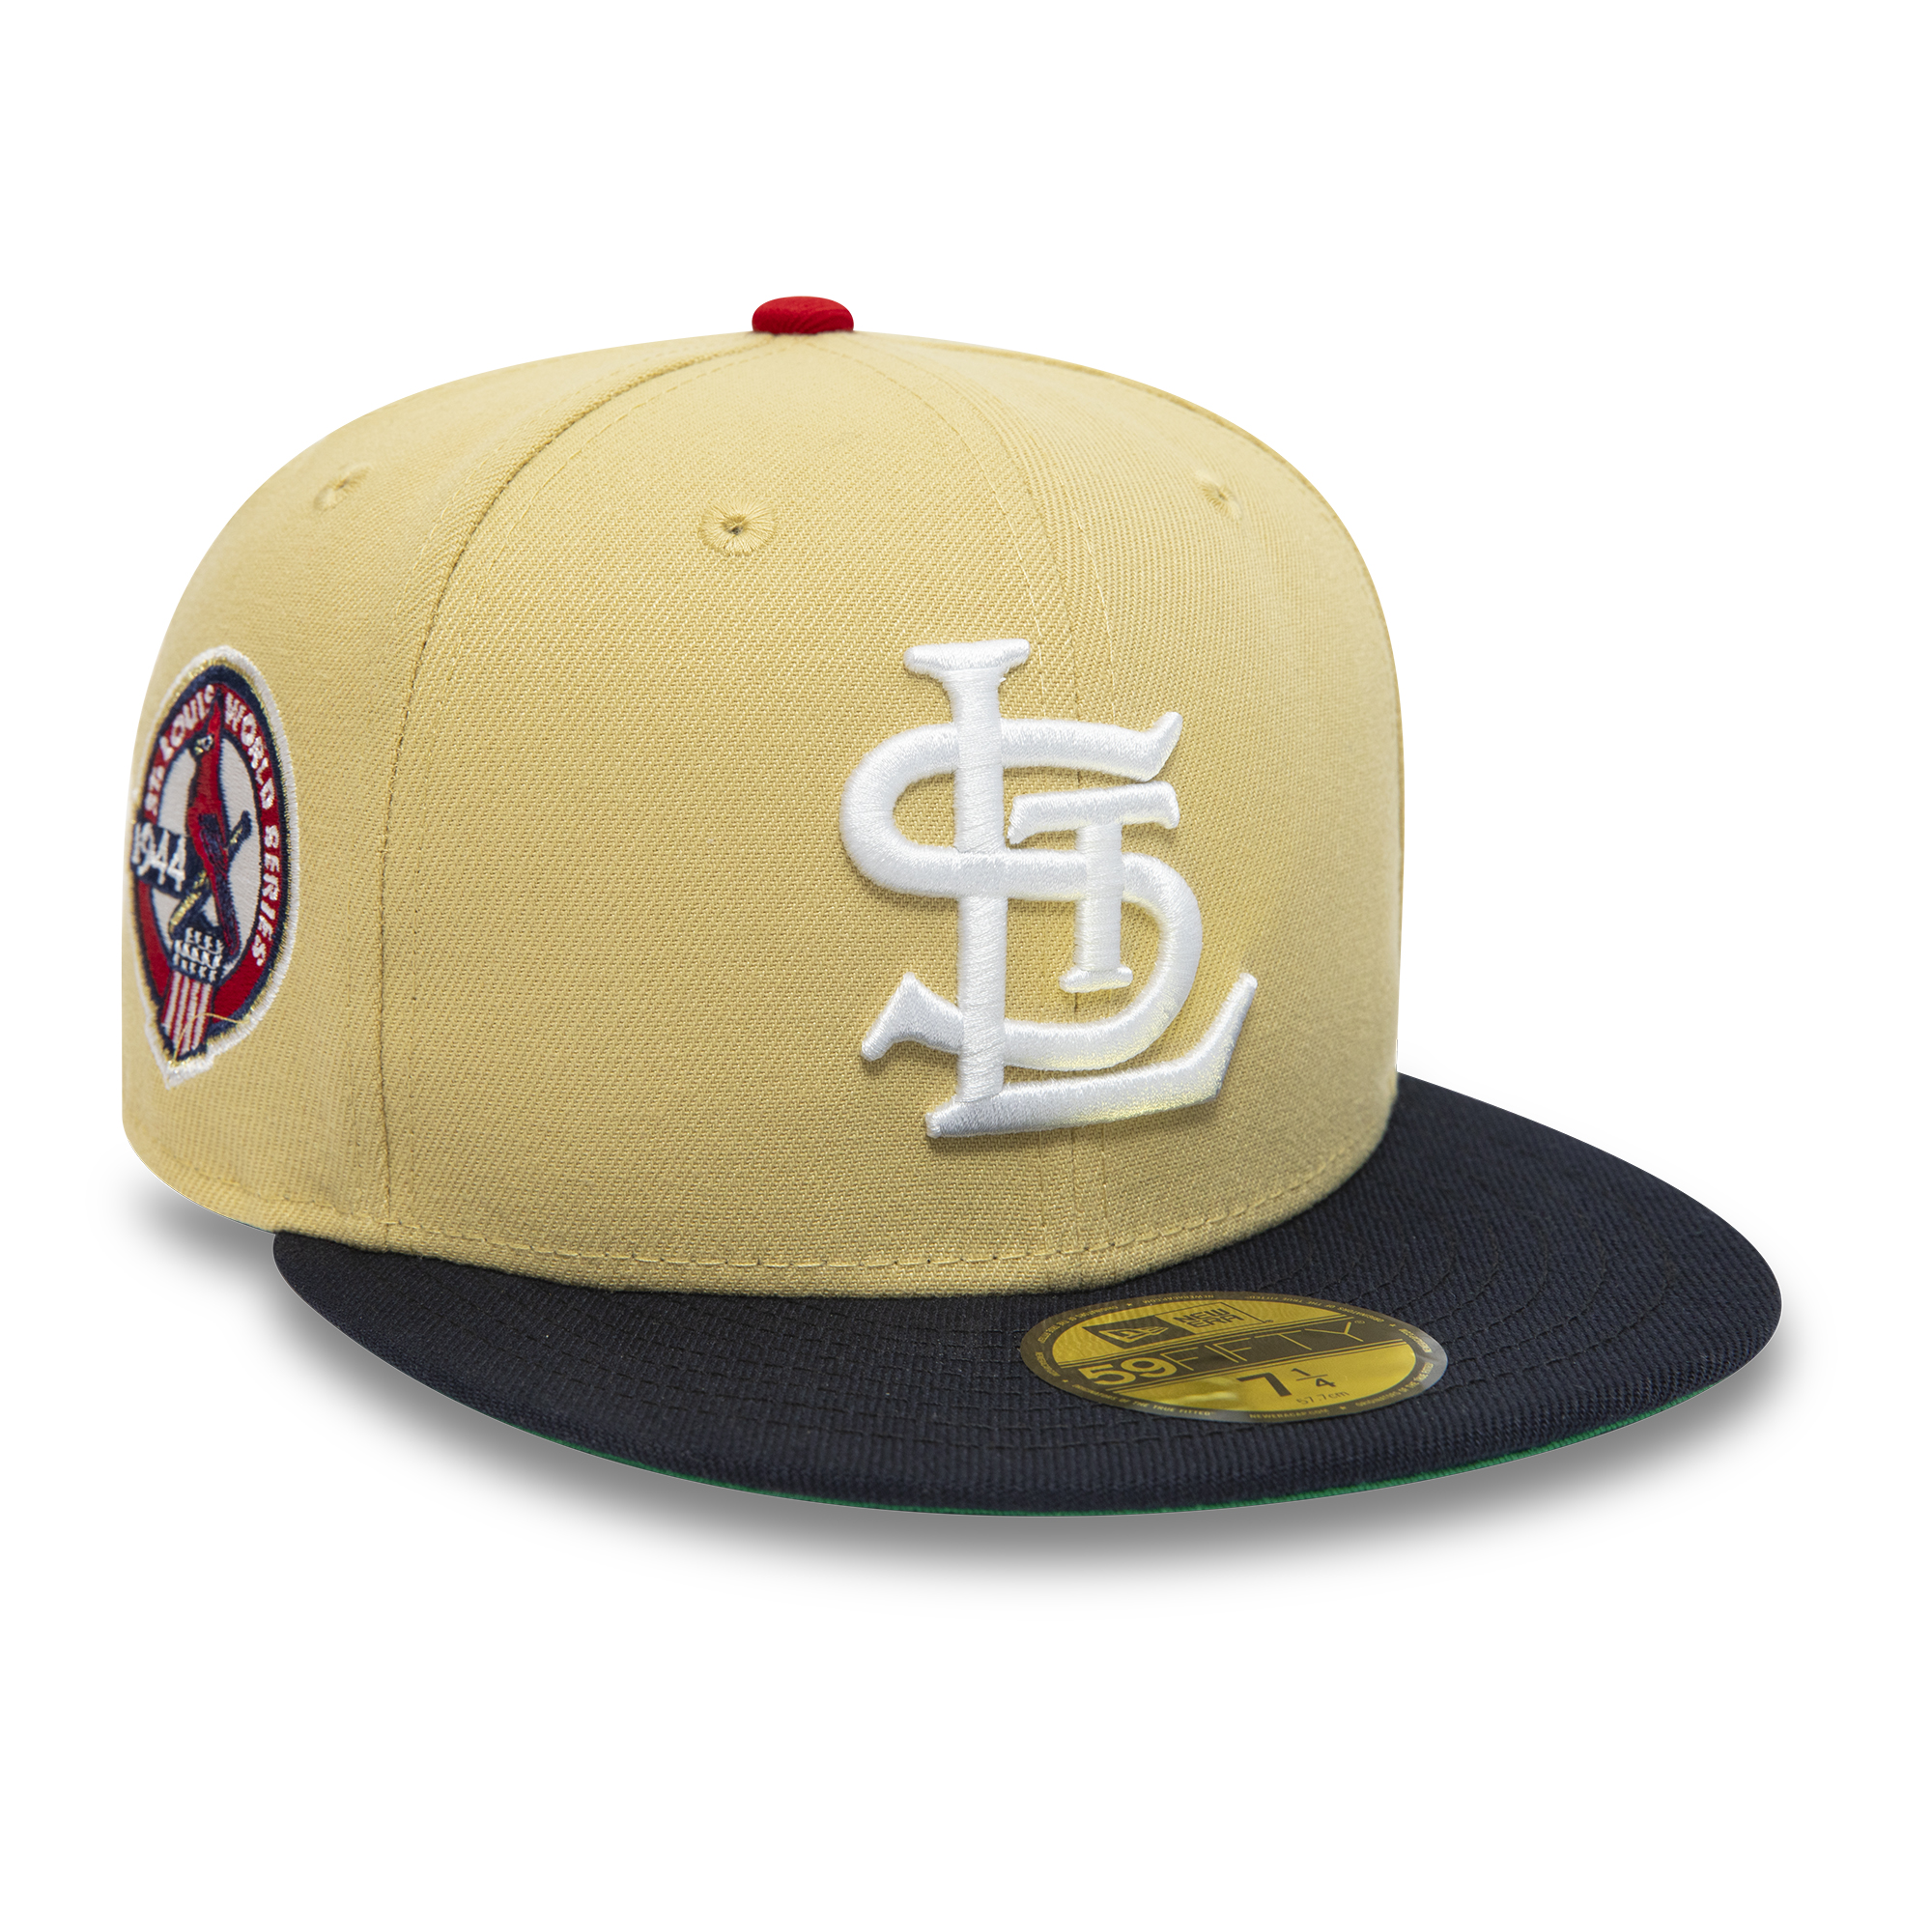 Official New Era St. Louis Cardinals MLB Gold 59FIFTY Fitted Cap B8072_289